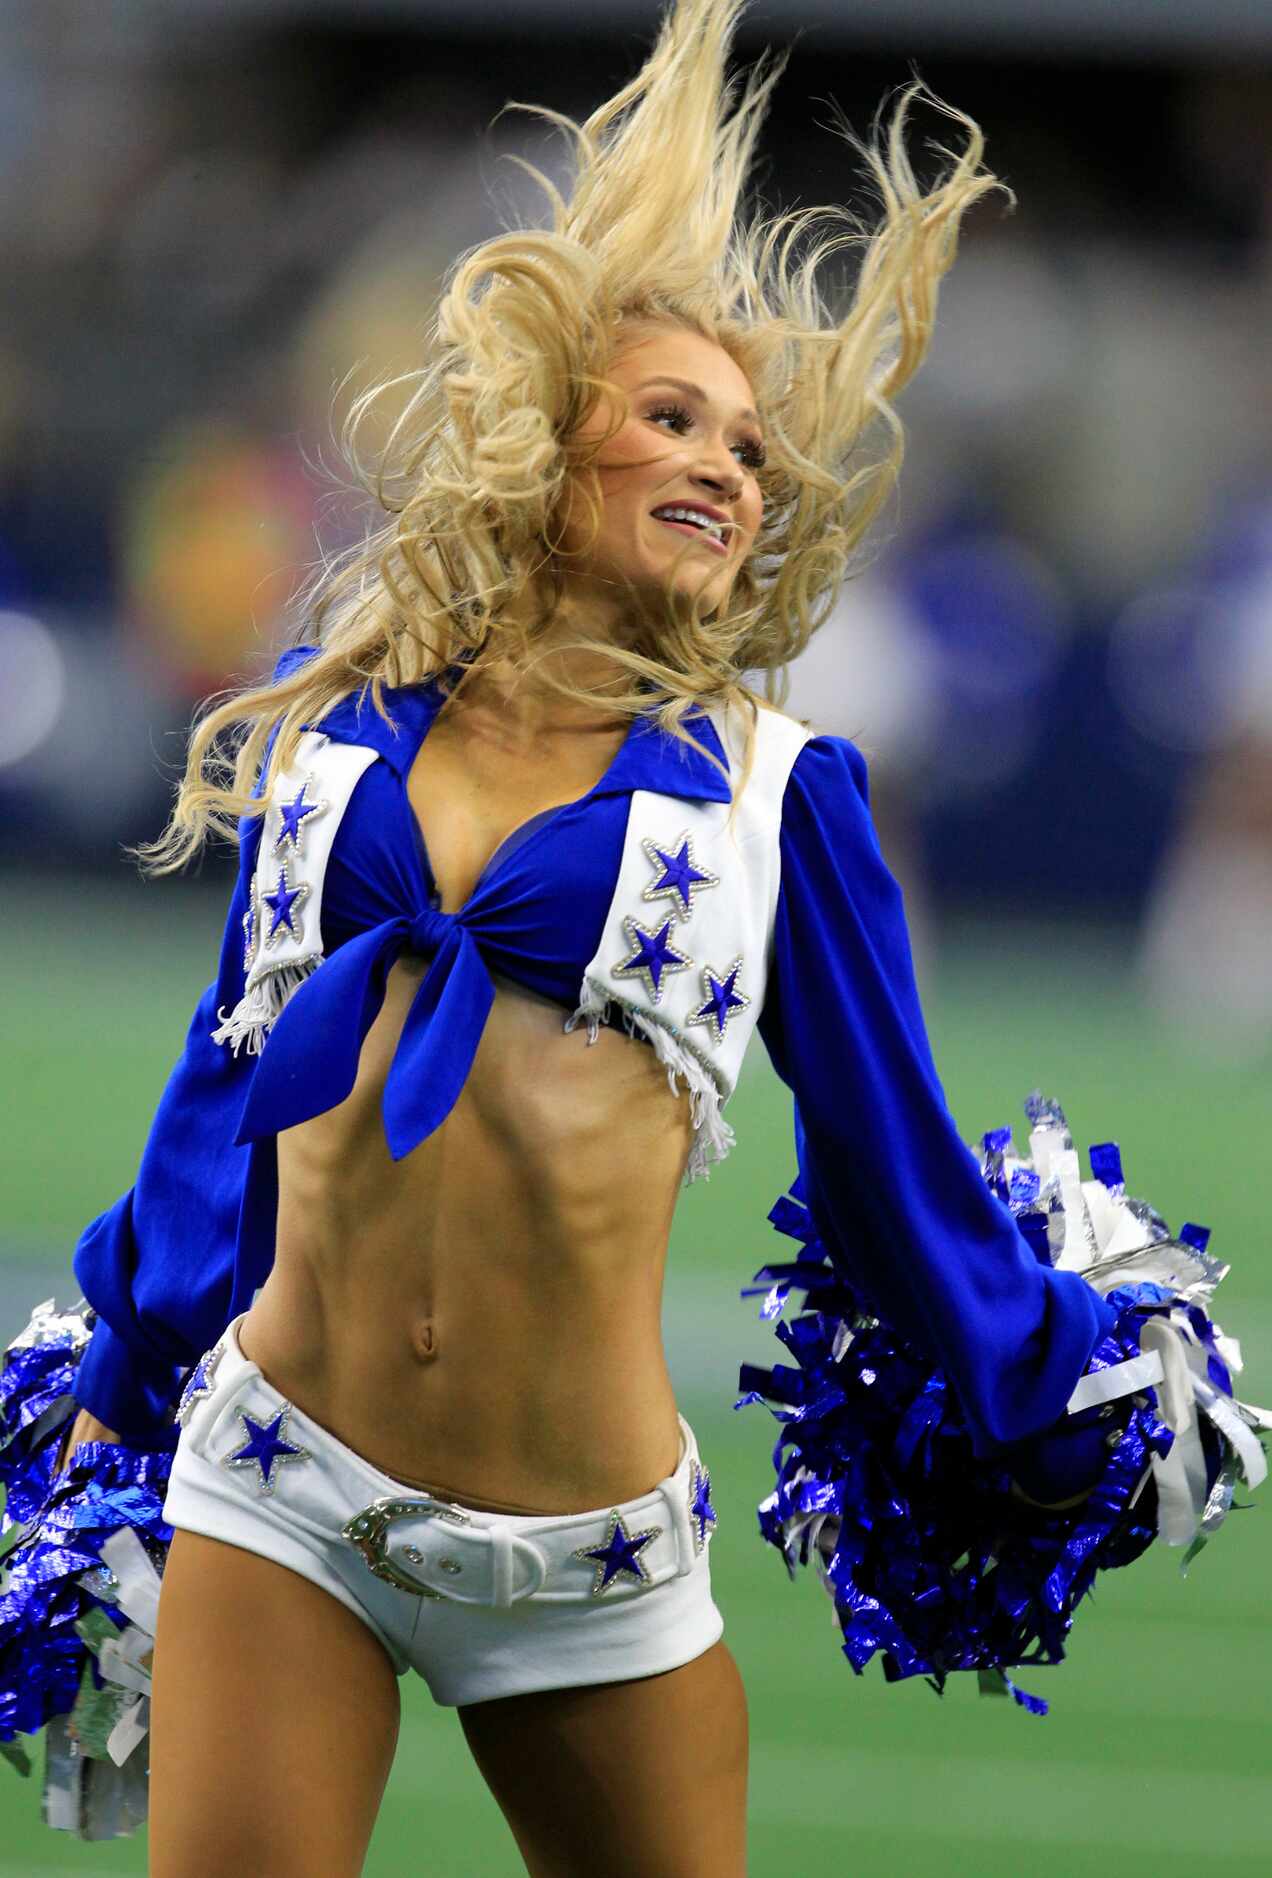 The hair of a Dallas Cowboy cheerleader flies in the air during a routine during a break in...